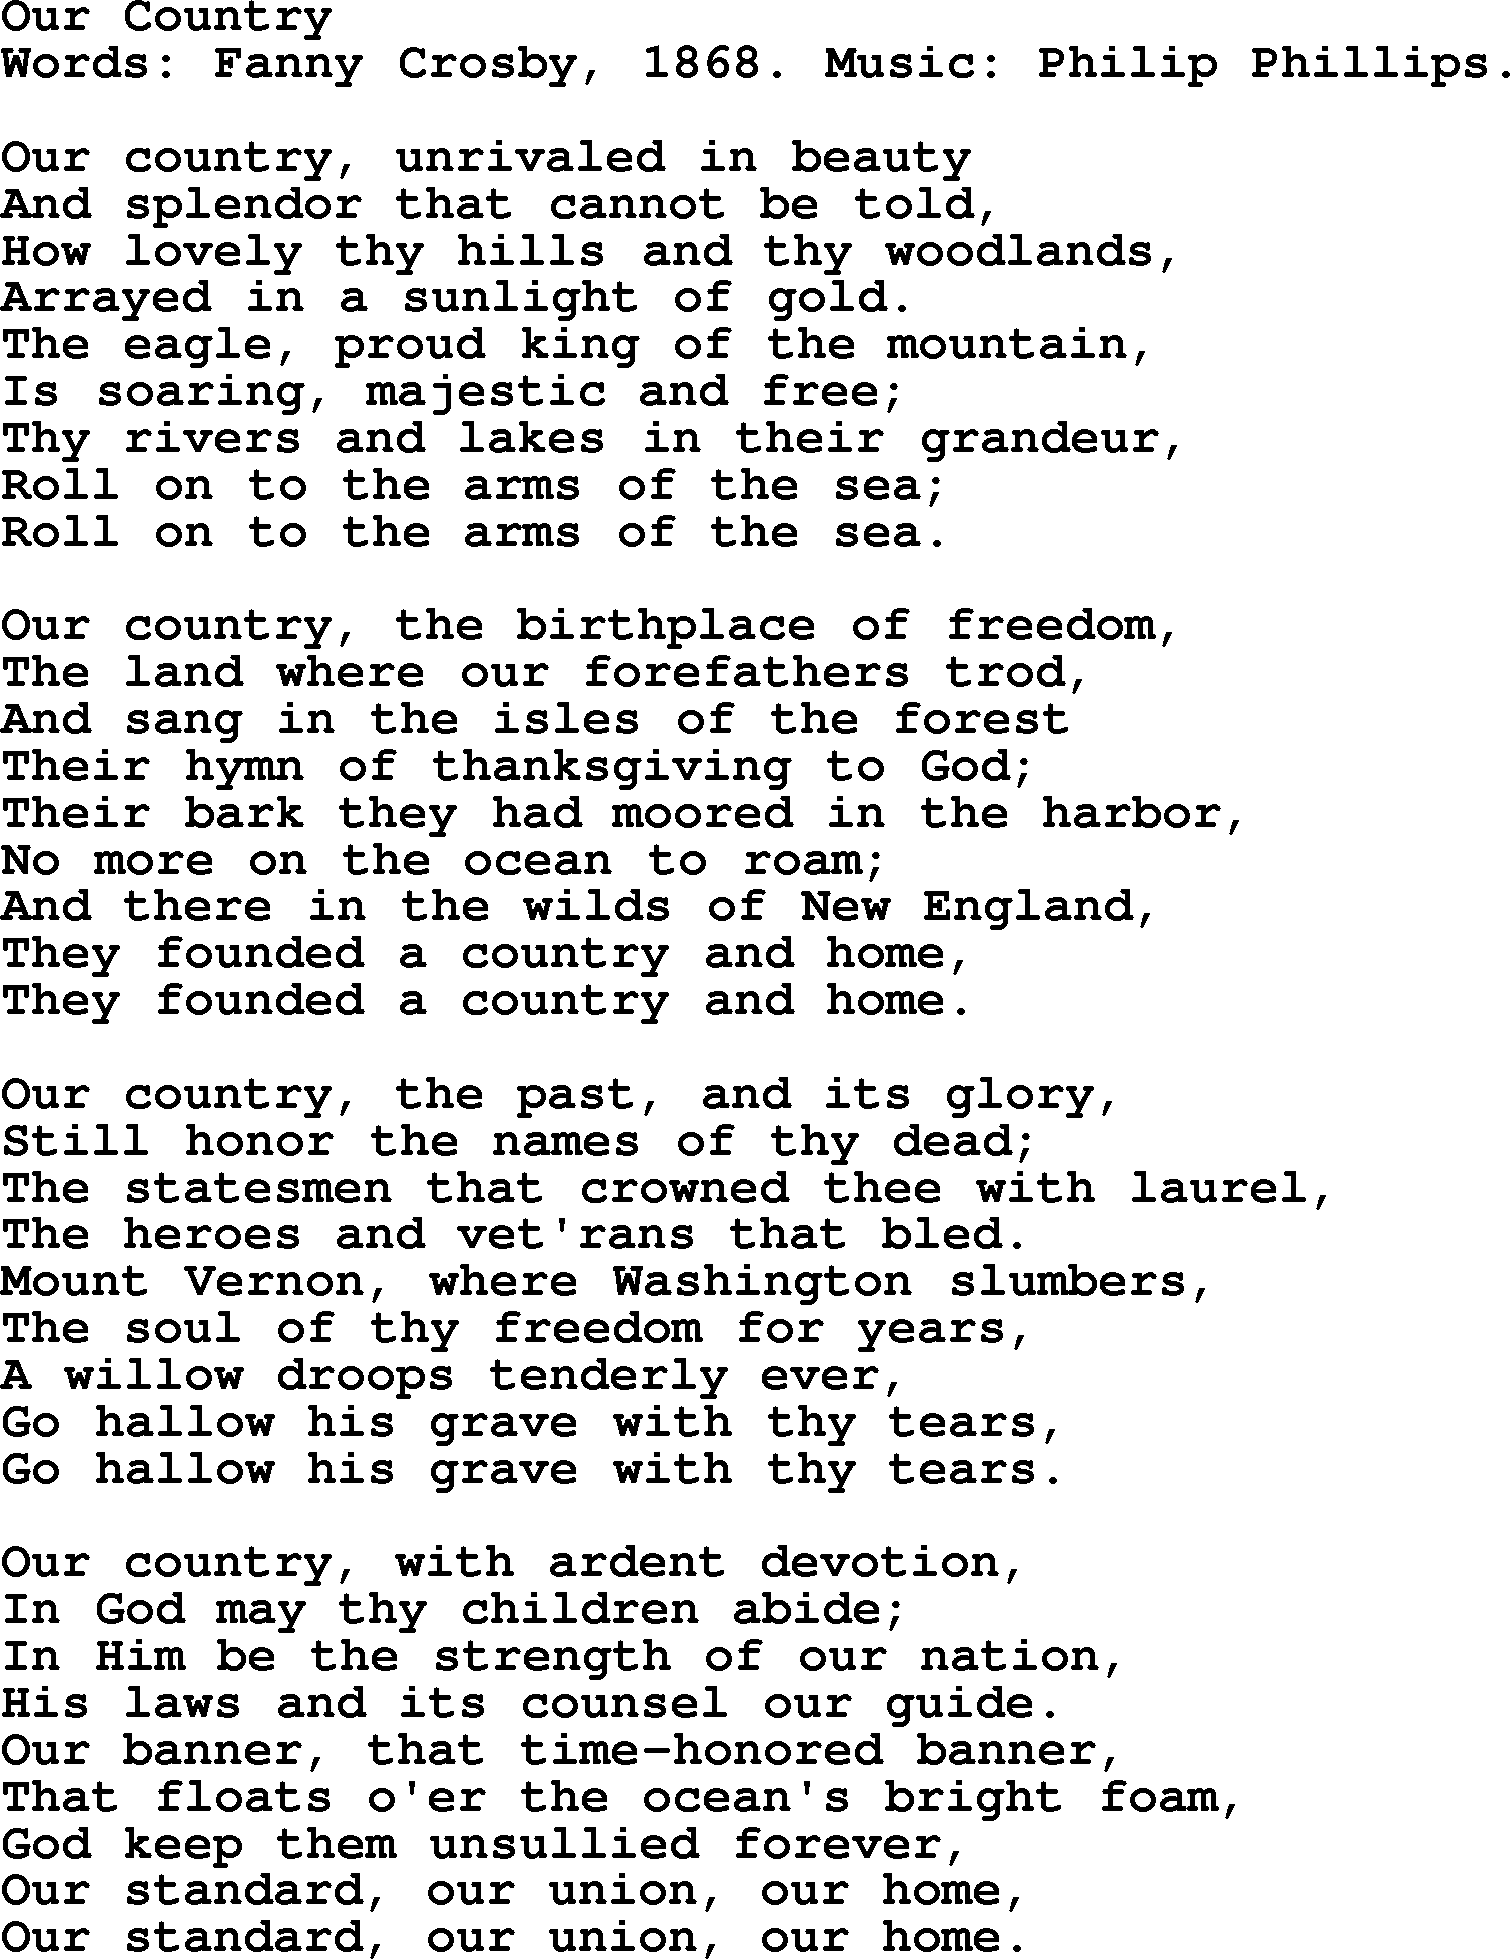 Fanny Crosby song: Our Country, lyrics